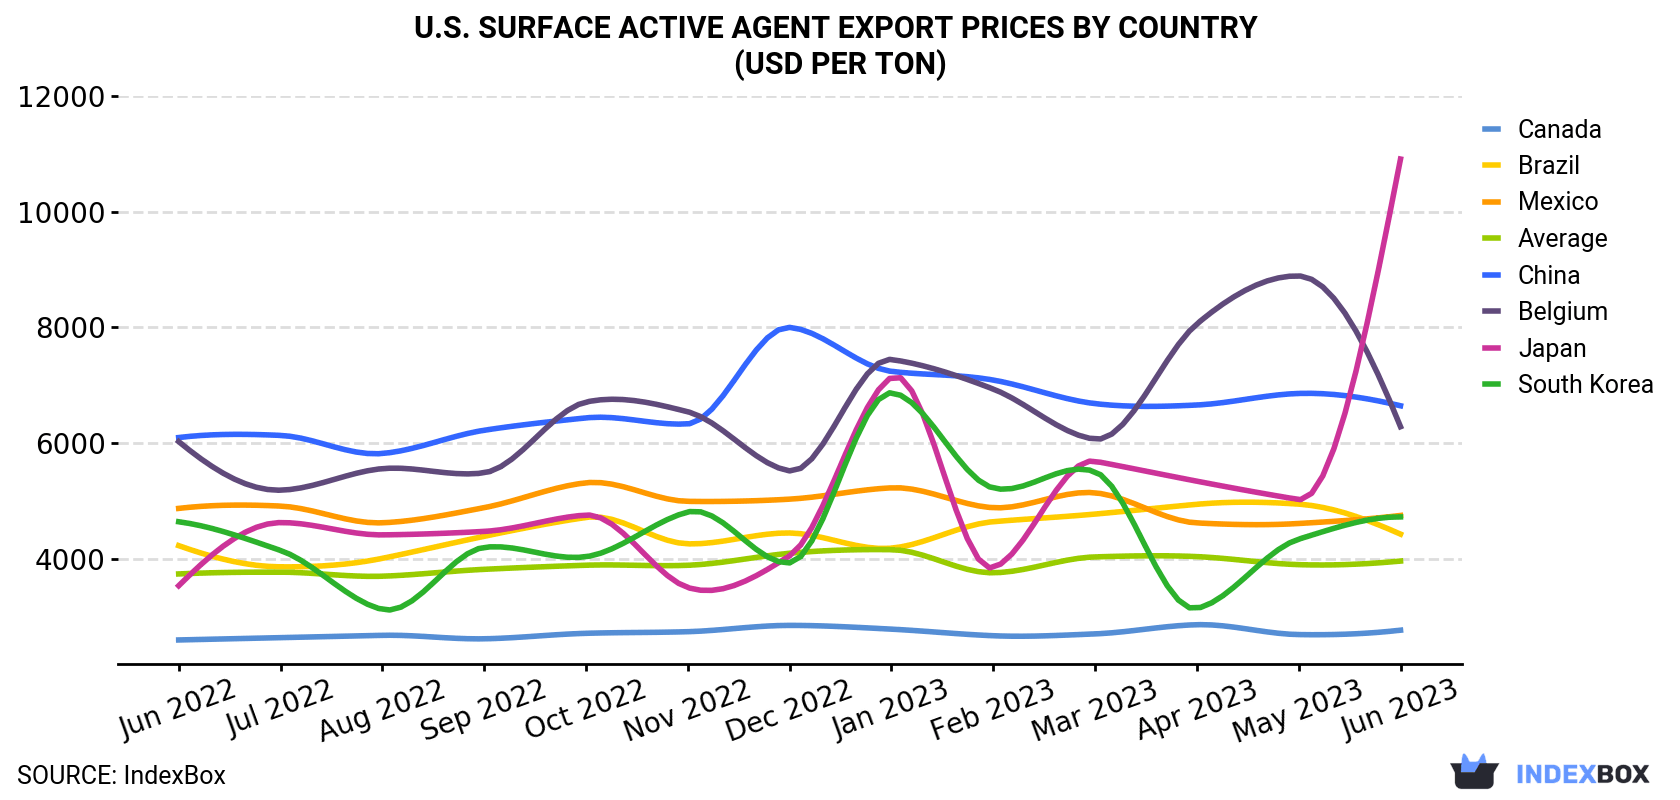 U.S. Surface Active Agent Export Prices By Country (USD Per Ton)